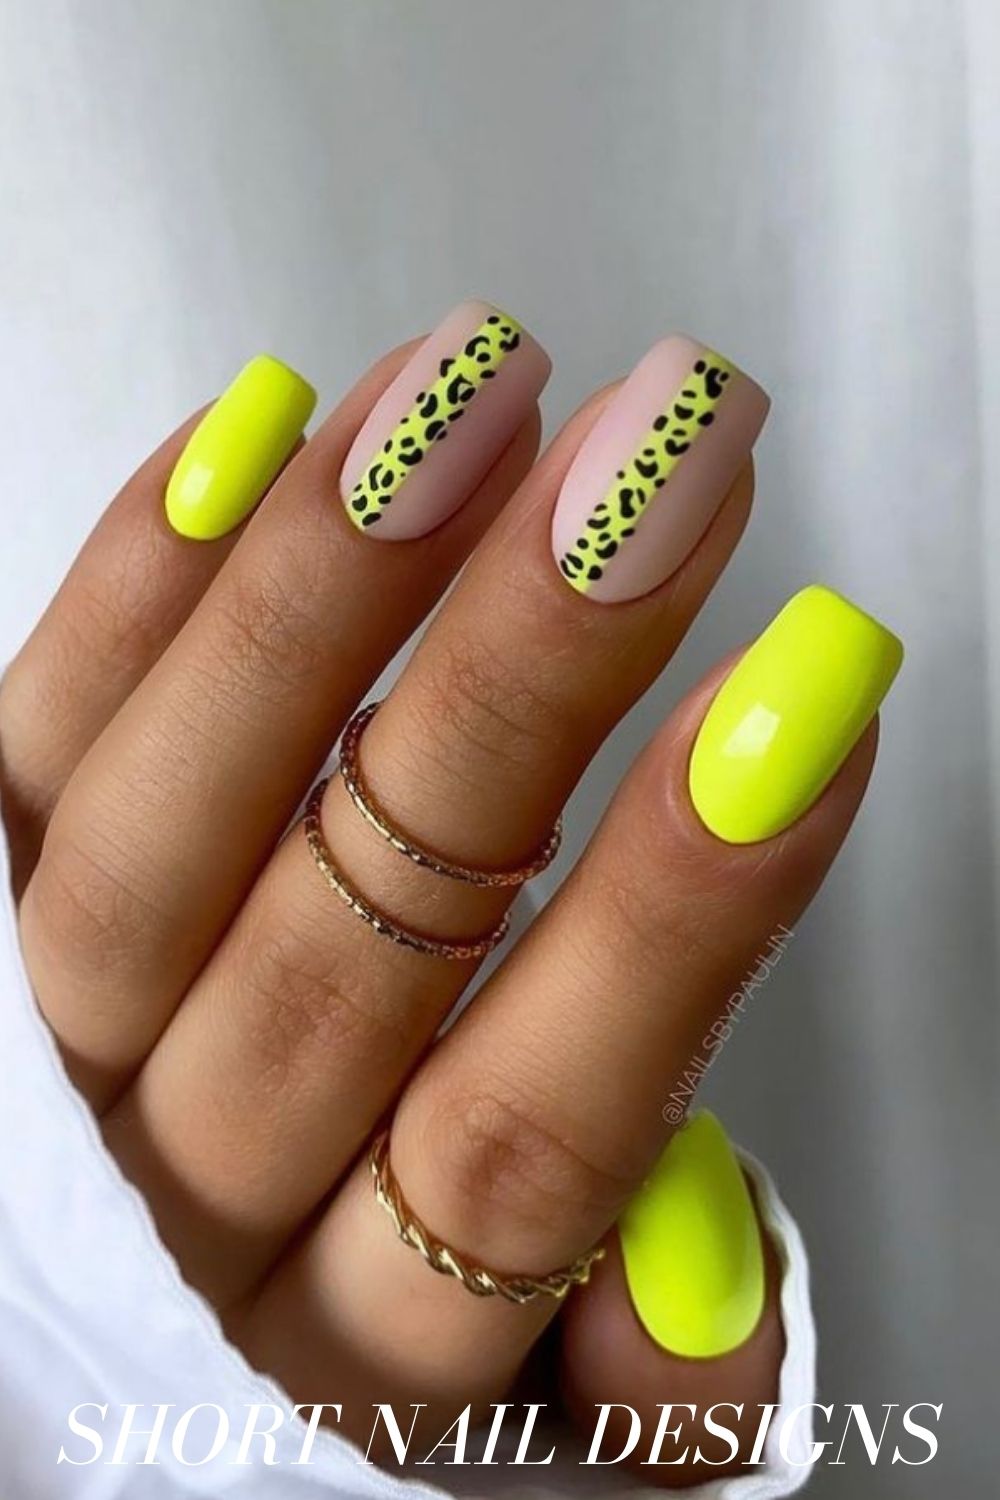 Cute Short Acrylic Nails Designs you'll Want to Try